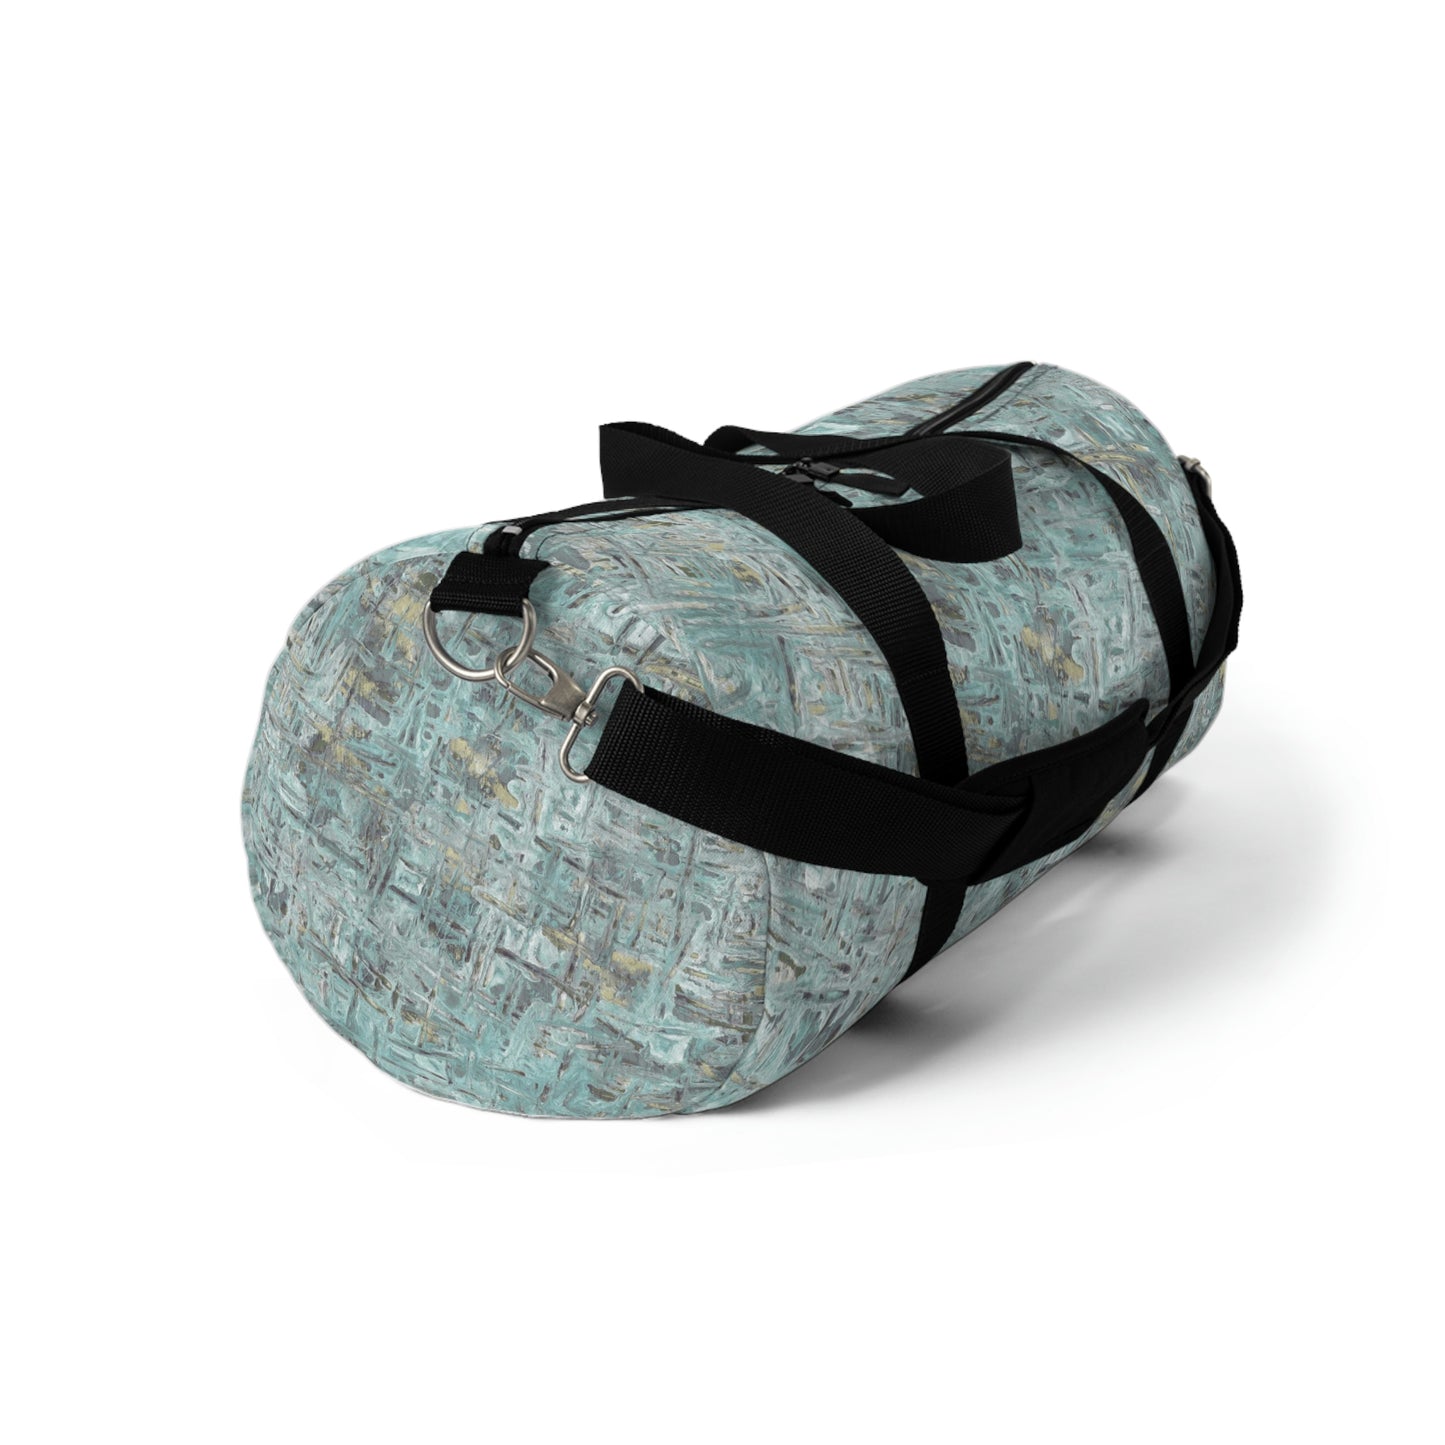 Abstract Duffle Bag, Weekender Duffle Bag, Carry- on Travel Overnight Canvas Duffel Bag